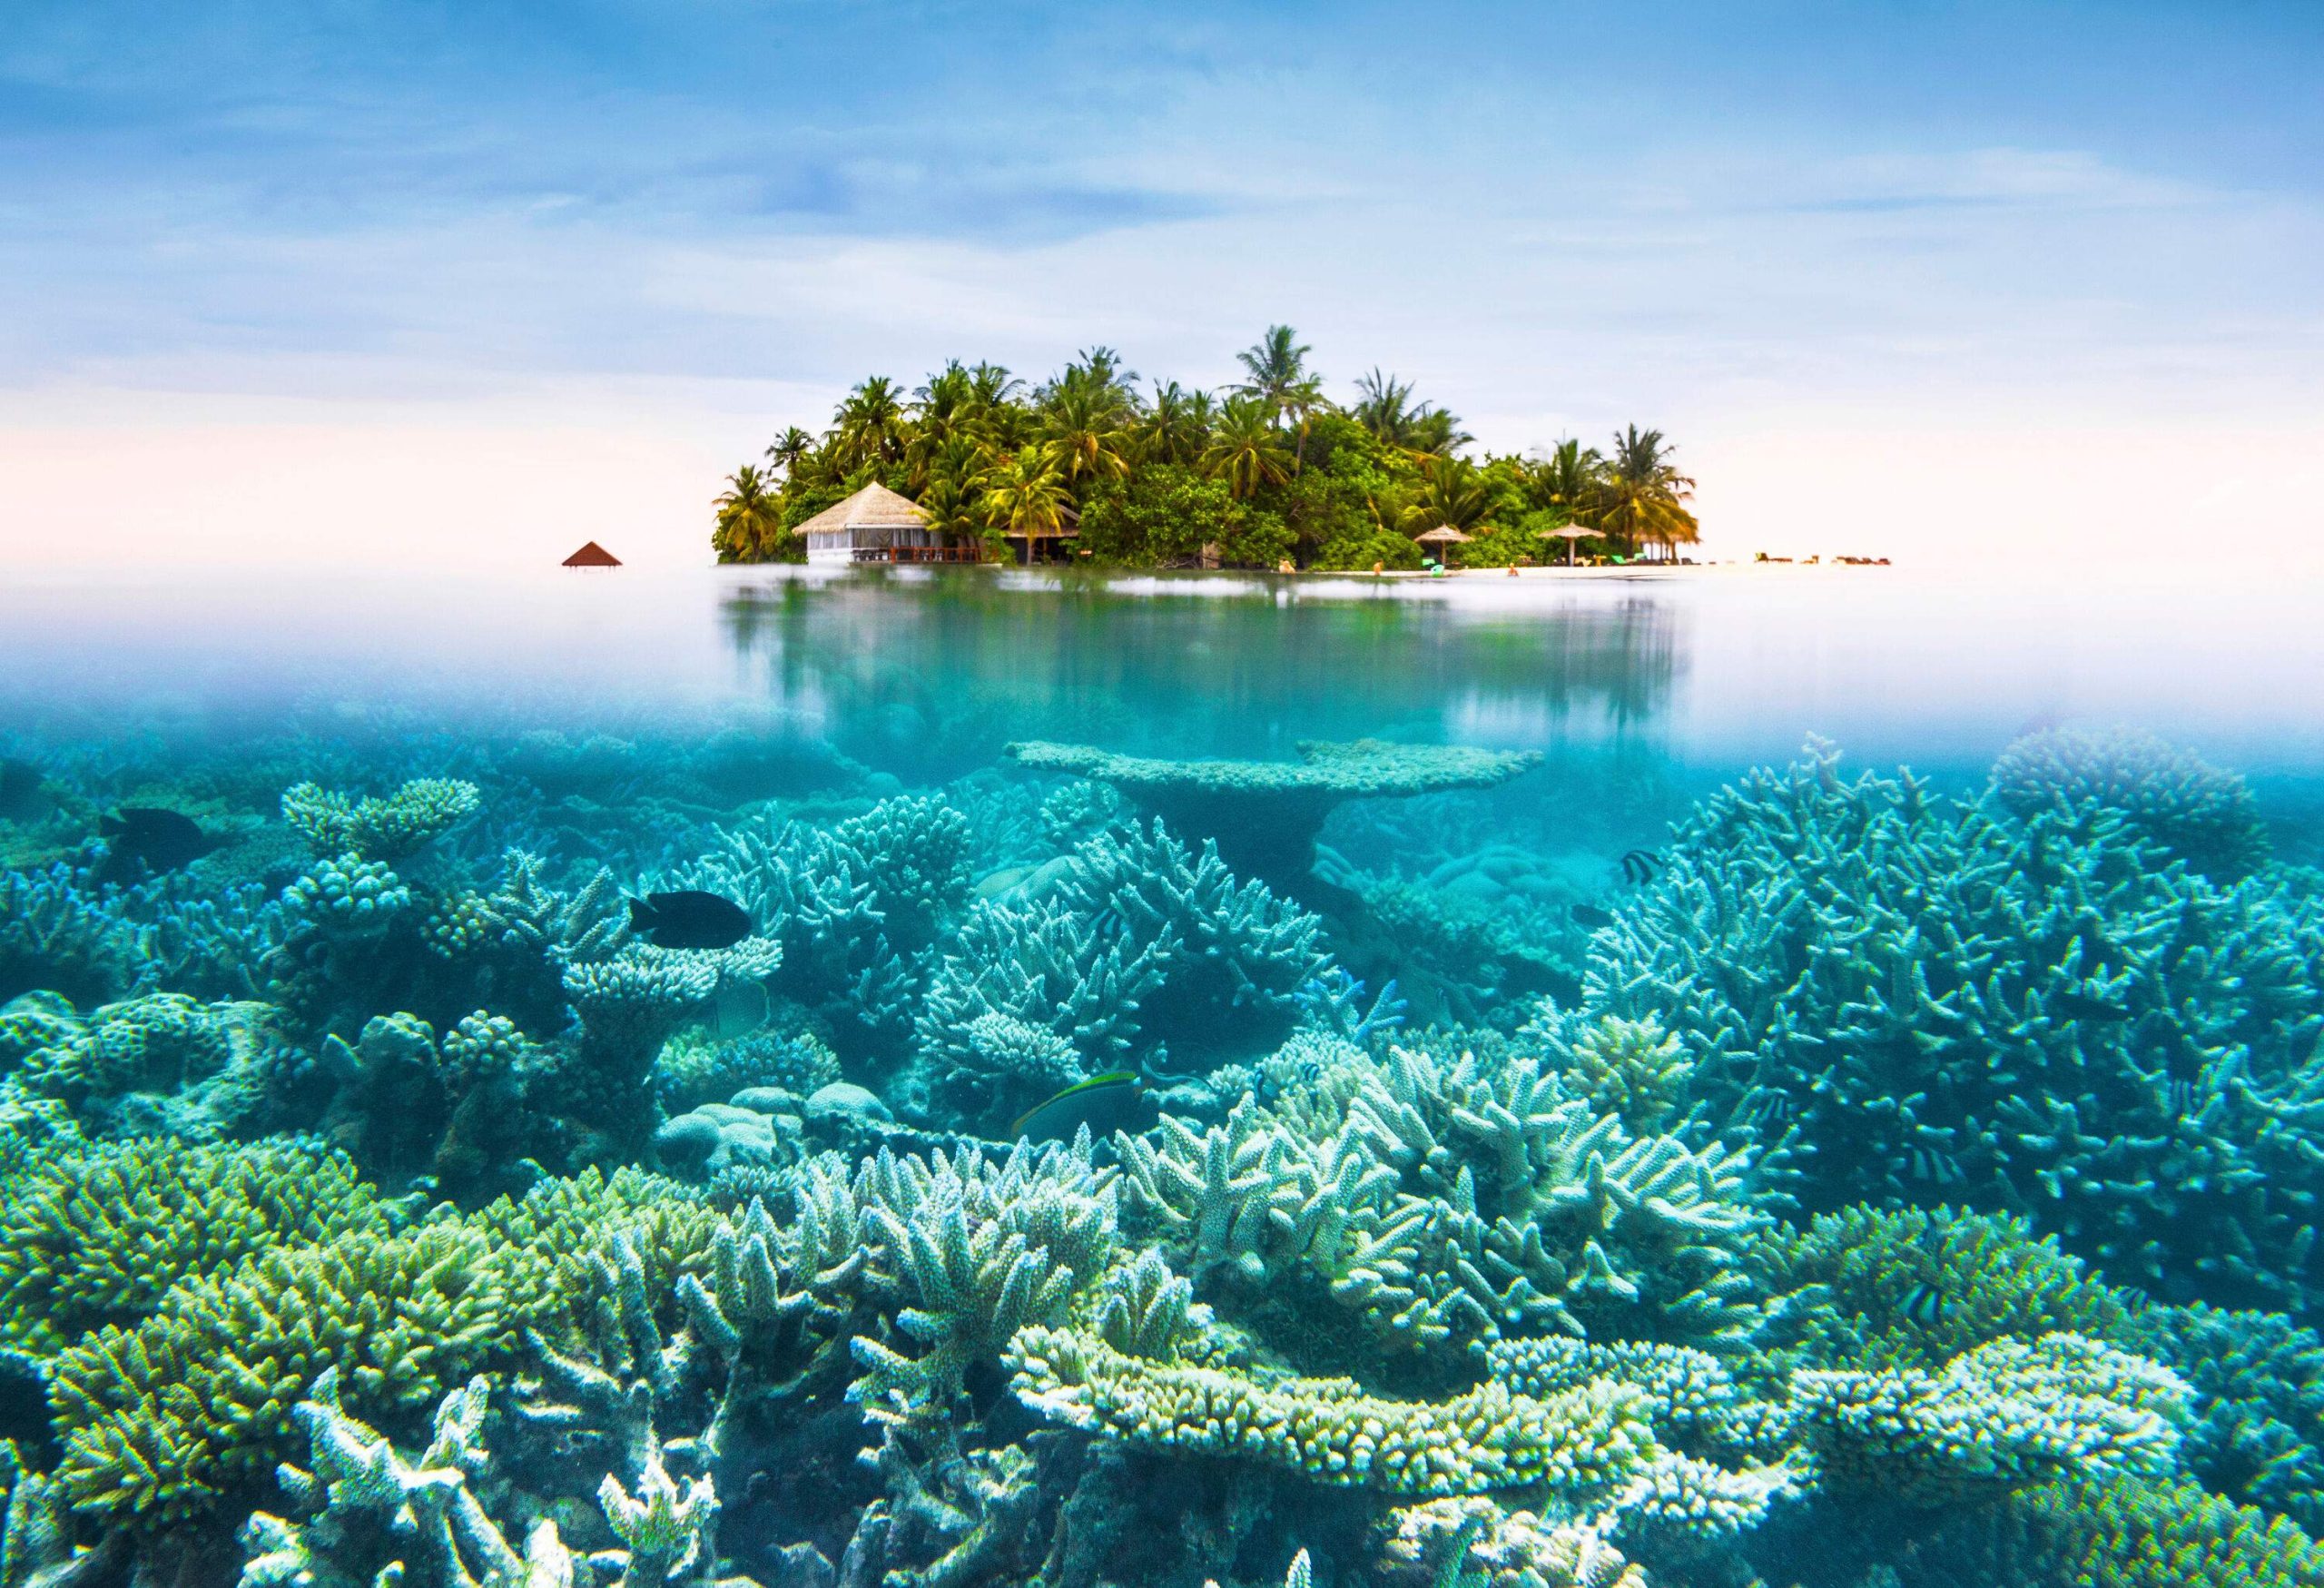 A picturesque coral landscape under the turquoise sea near a lush forested island on a scenic sky.